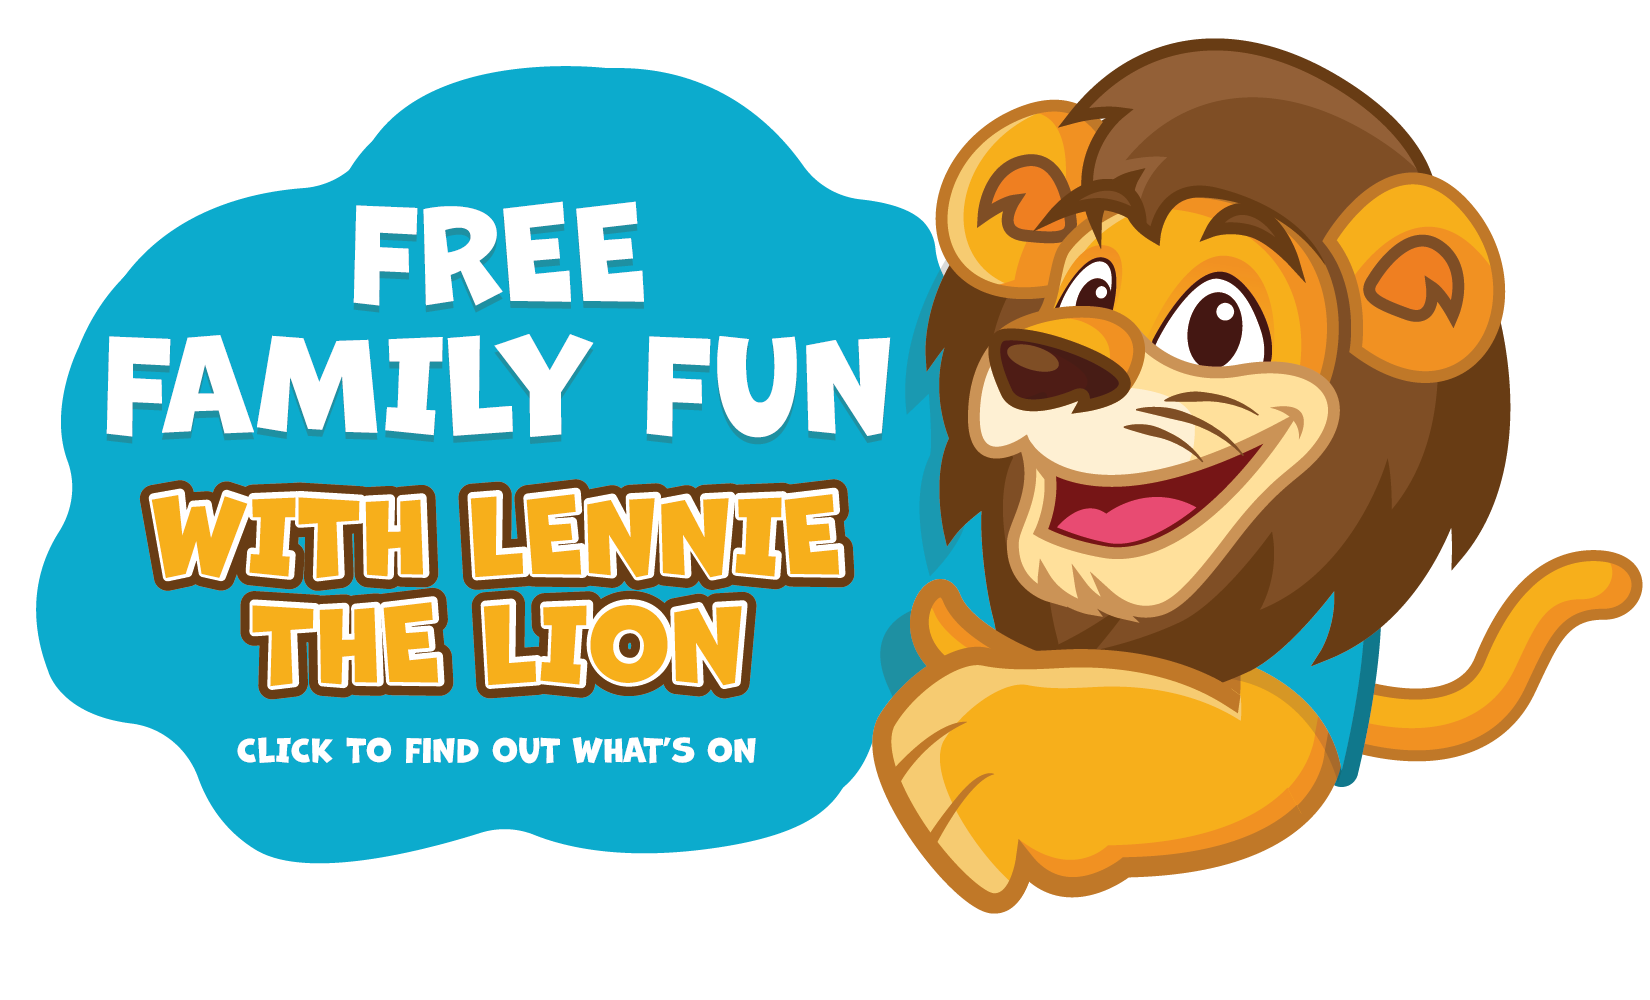 Free family fun with Lennie the Lion at Cubs Club